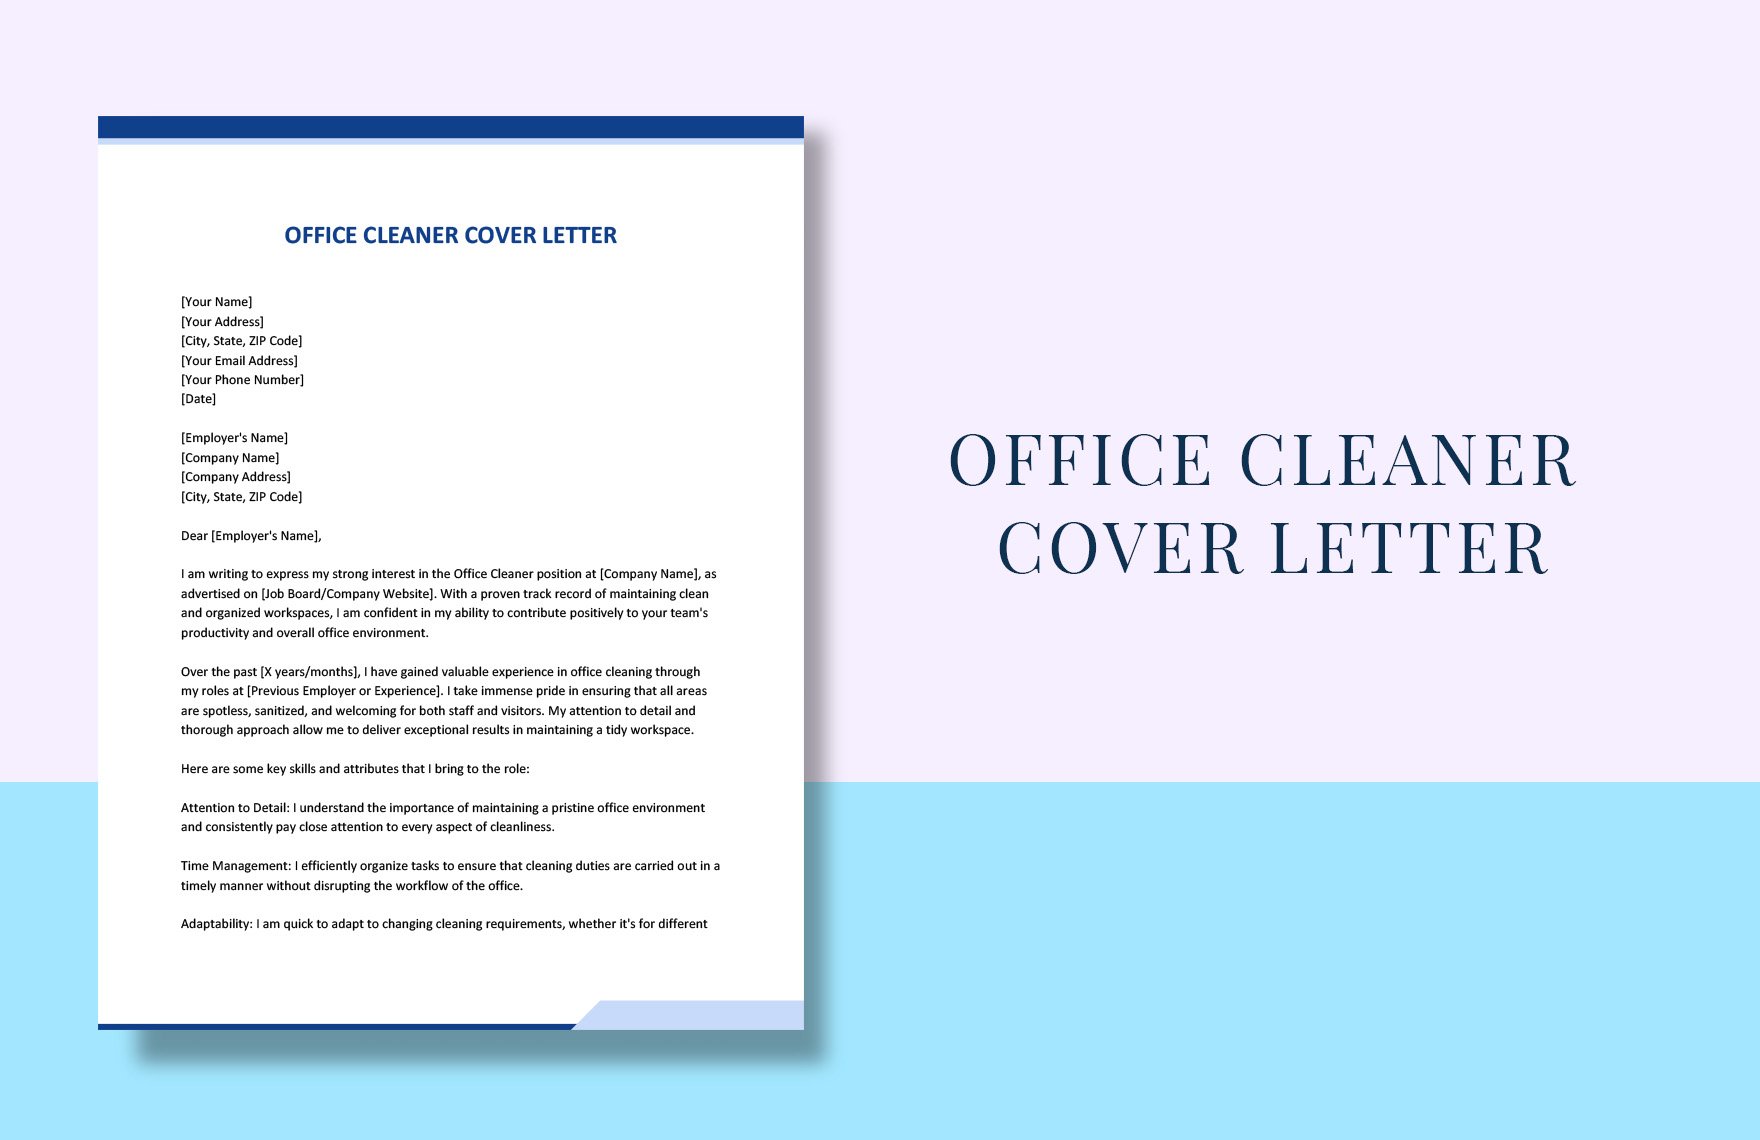 Office Cleaner Cover Letter in Word, Google Docs